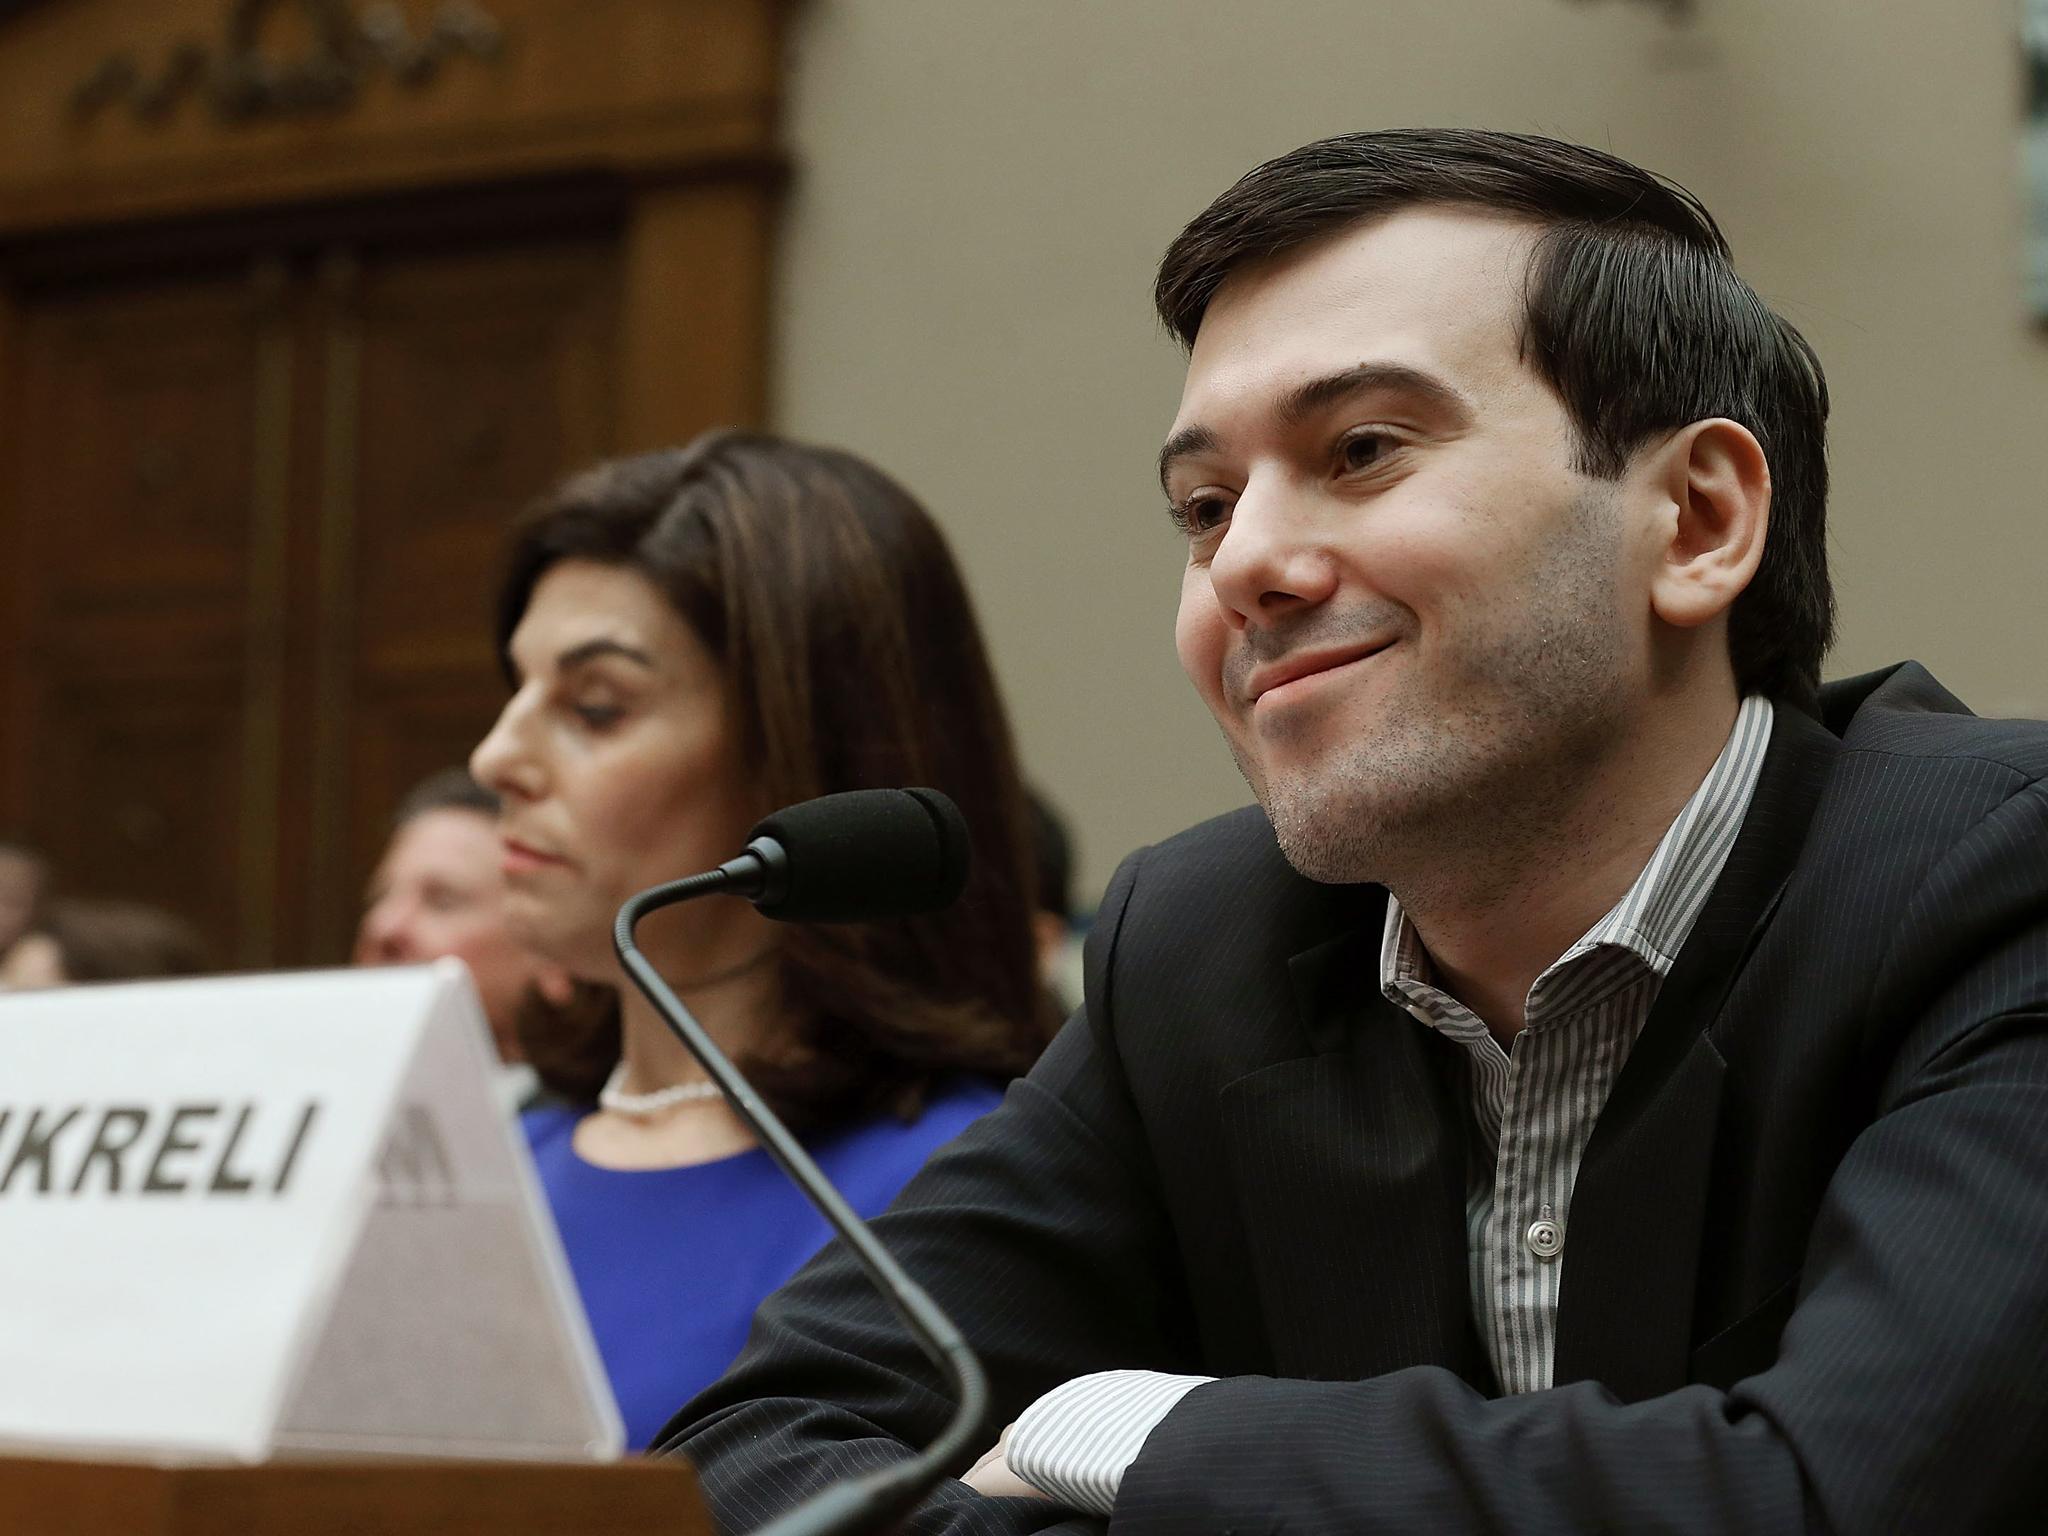 Shkreli was arrested in December on allegations of securities fraud